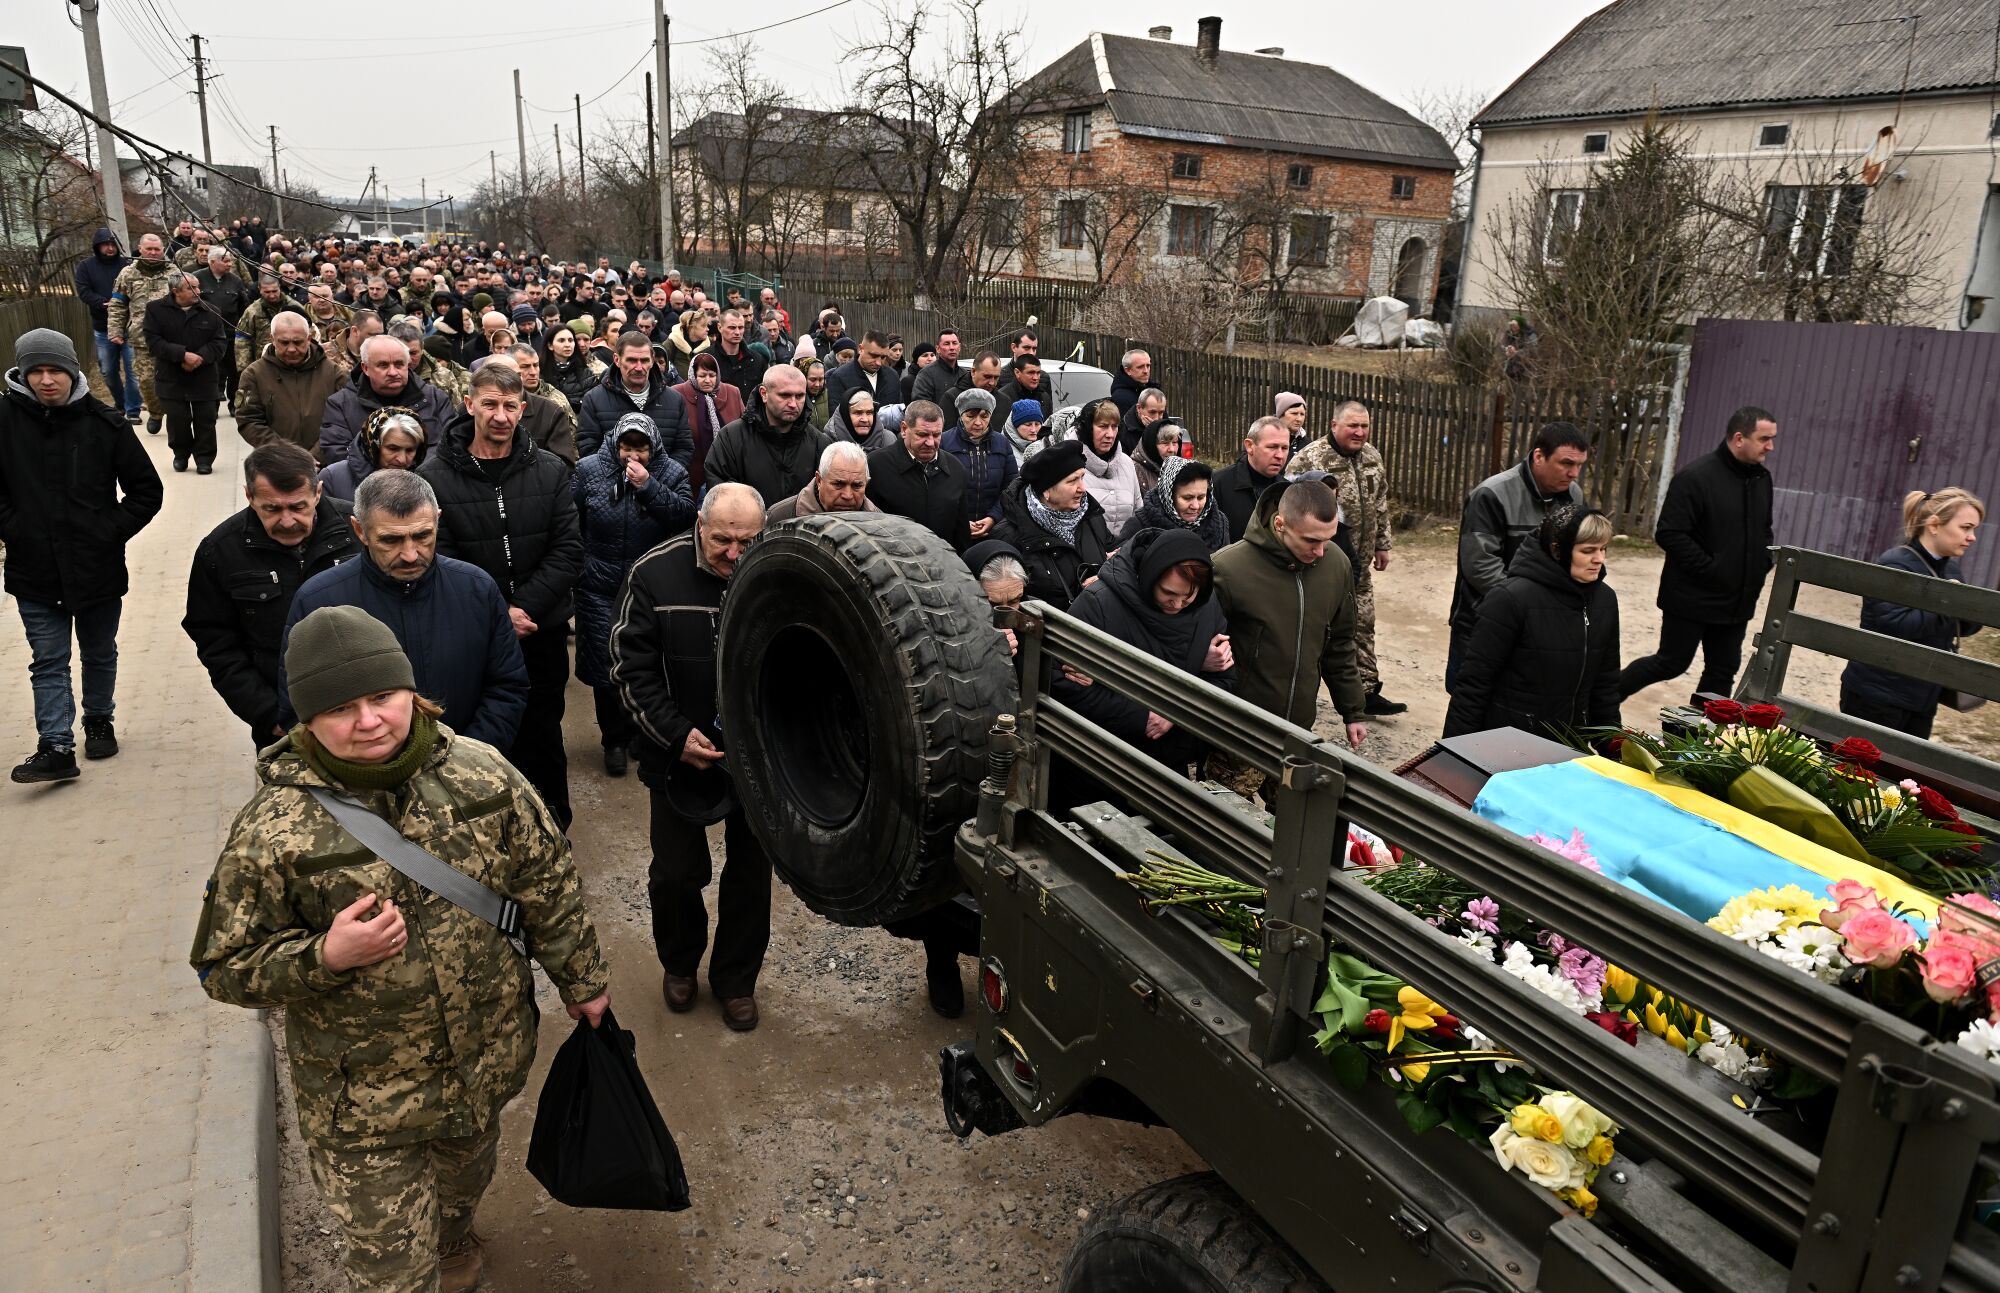 A funeral procession carrying the casket of two Ukrainian soldiers makes its way through the streets of Starychi, Ukraine.